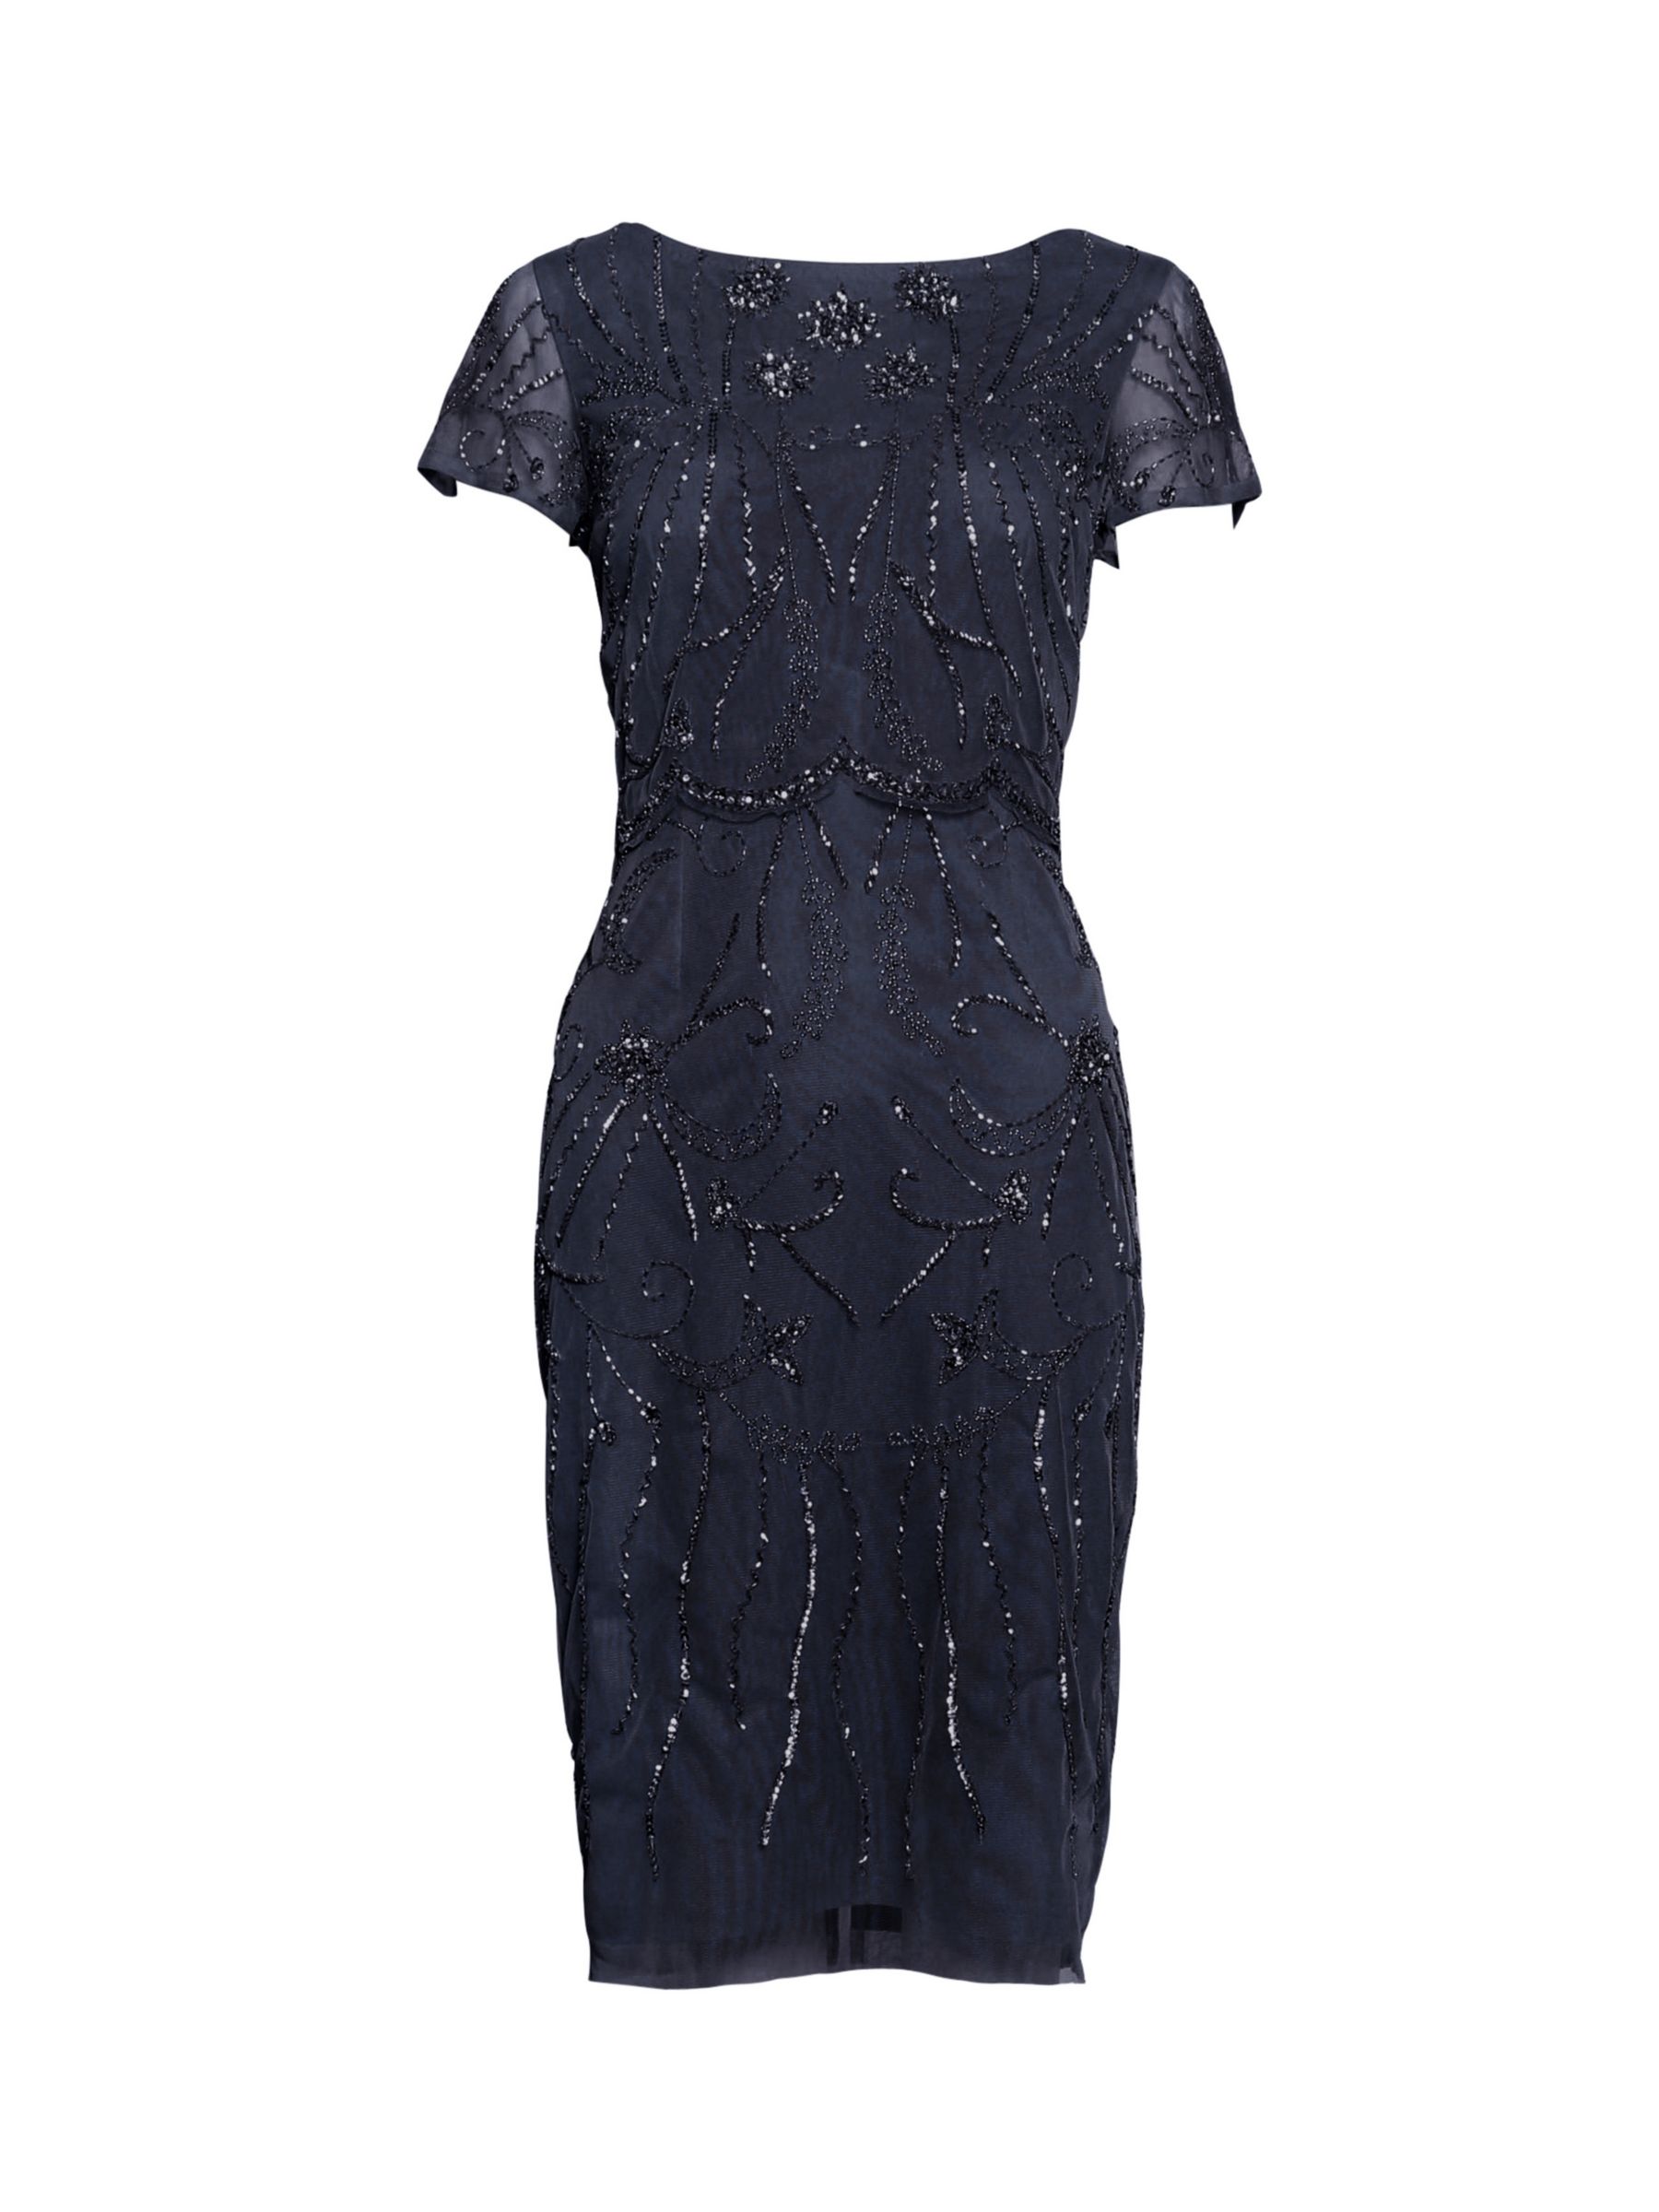 Adrianna Papell Beaded Cocktail Dress, Midnight at John Lewis & Partners